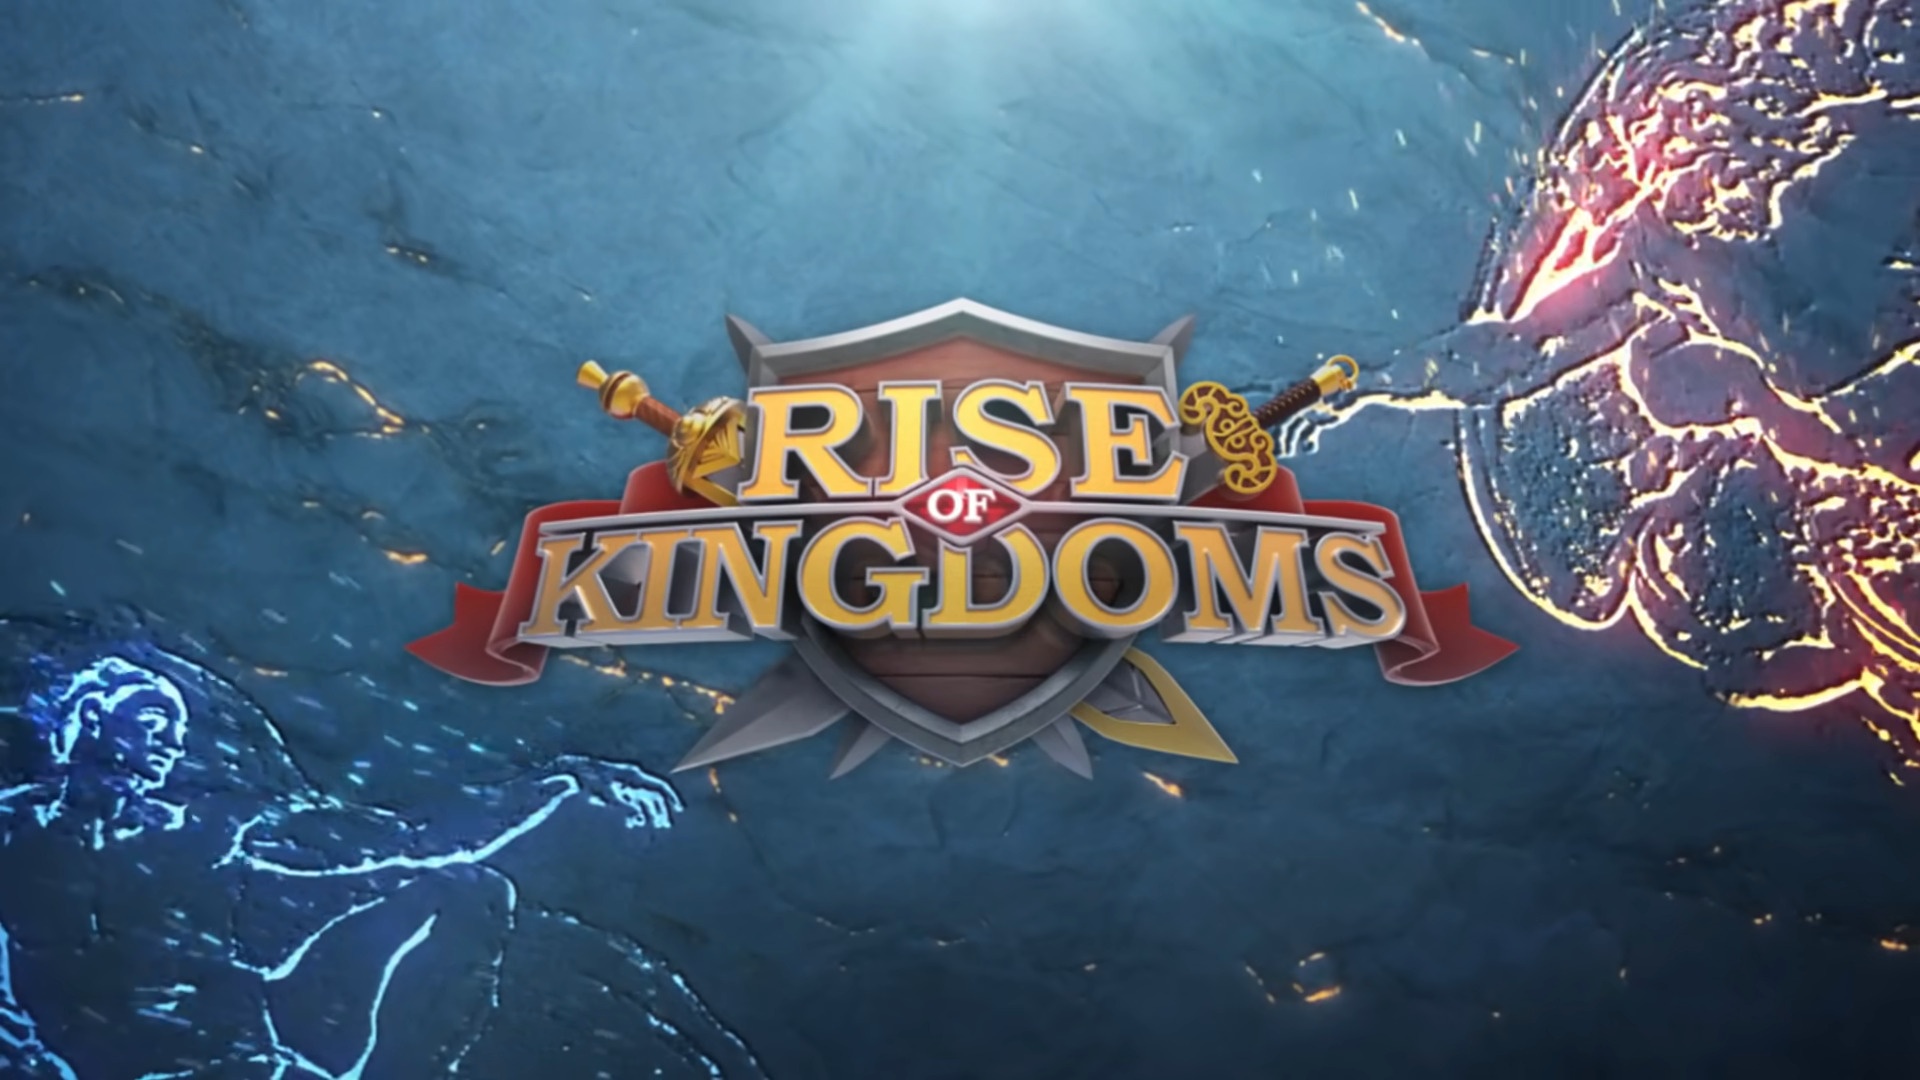 Learn How to Choose Commanders in Rise of Kingdoms